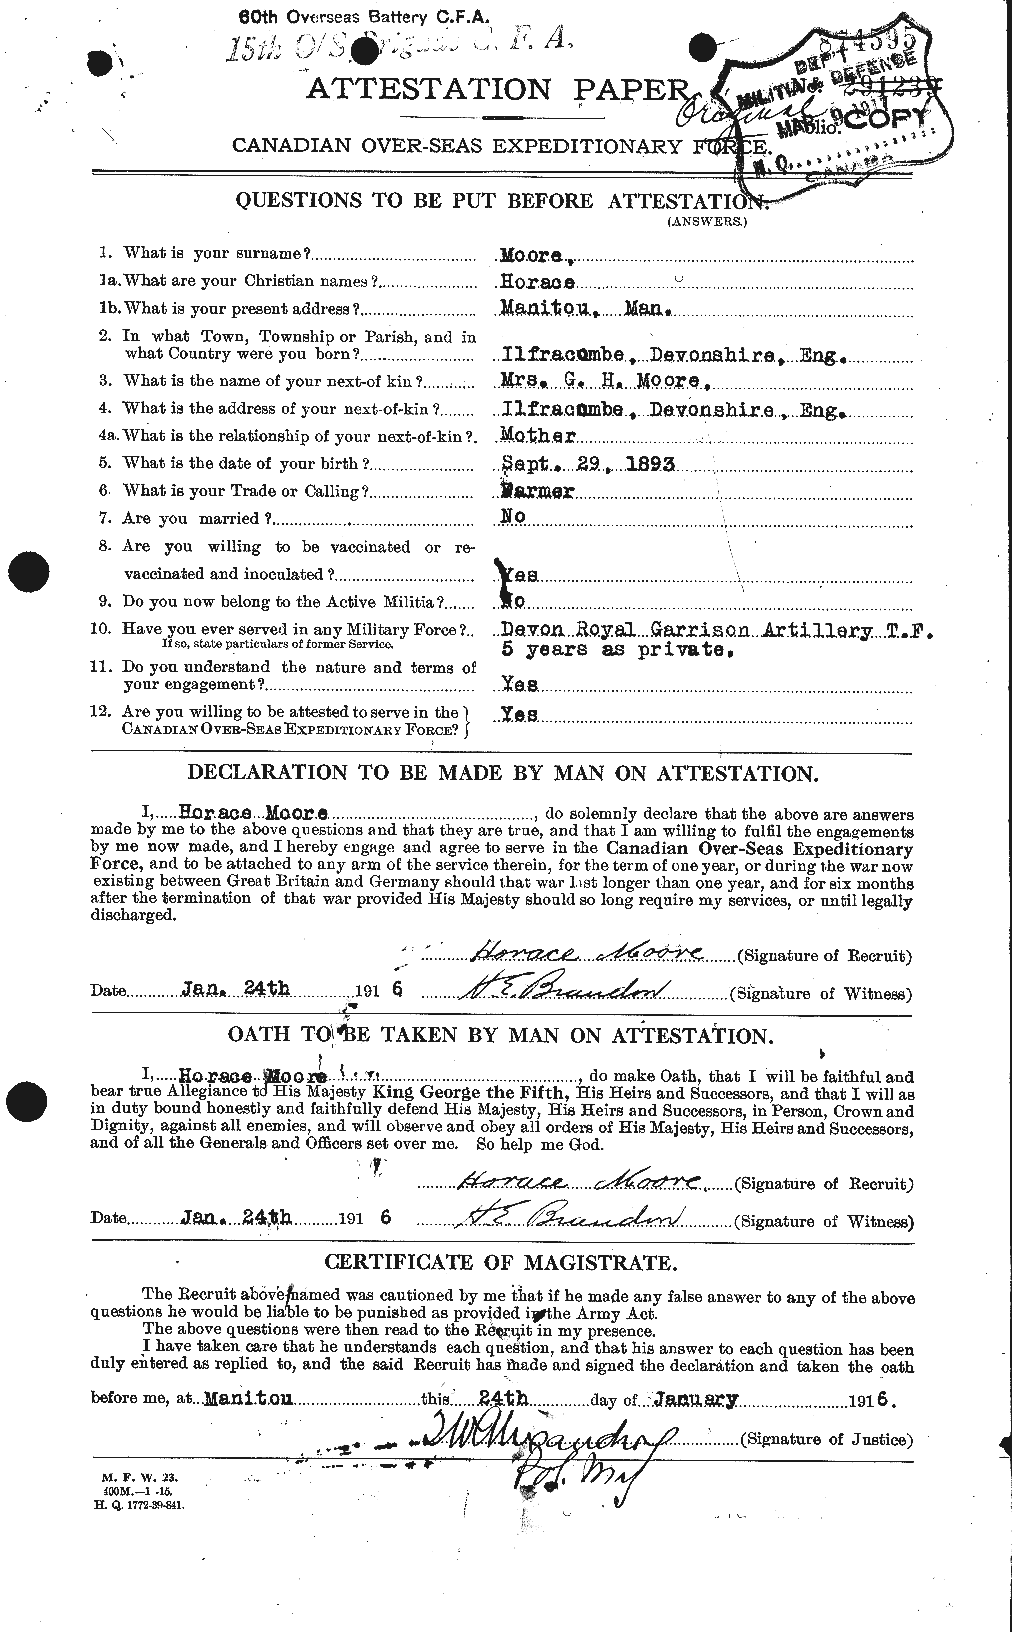 Personnel Records of the First World War - CEF 502131a